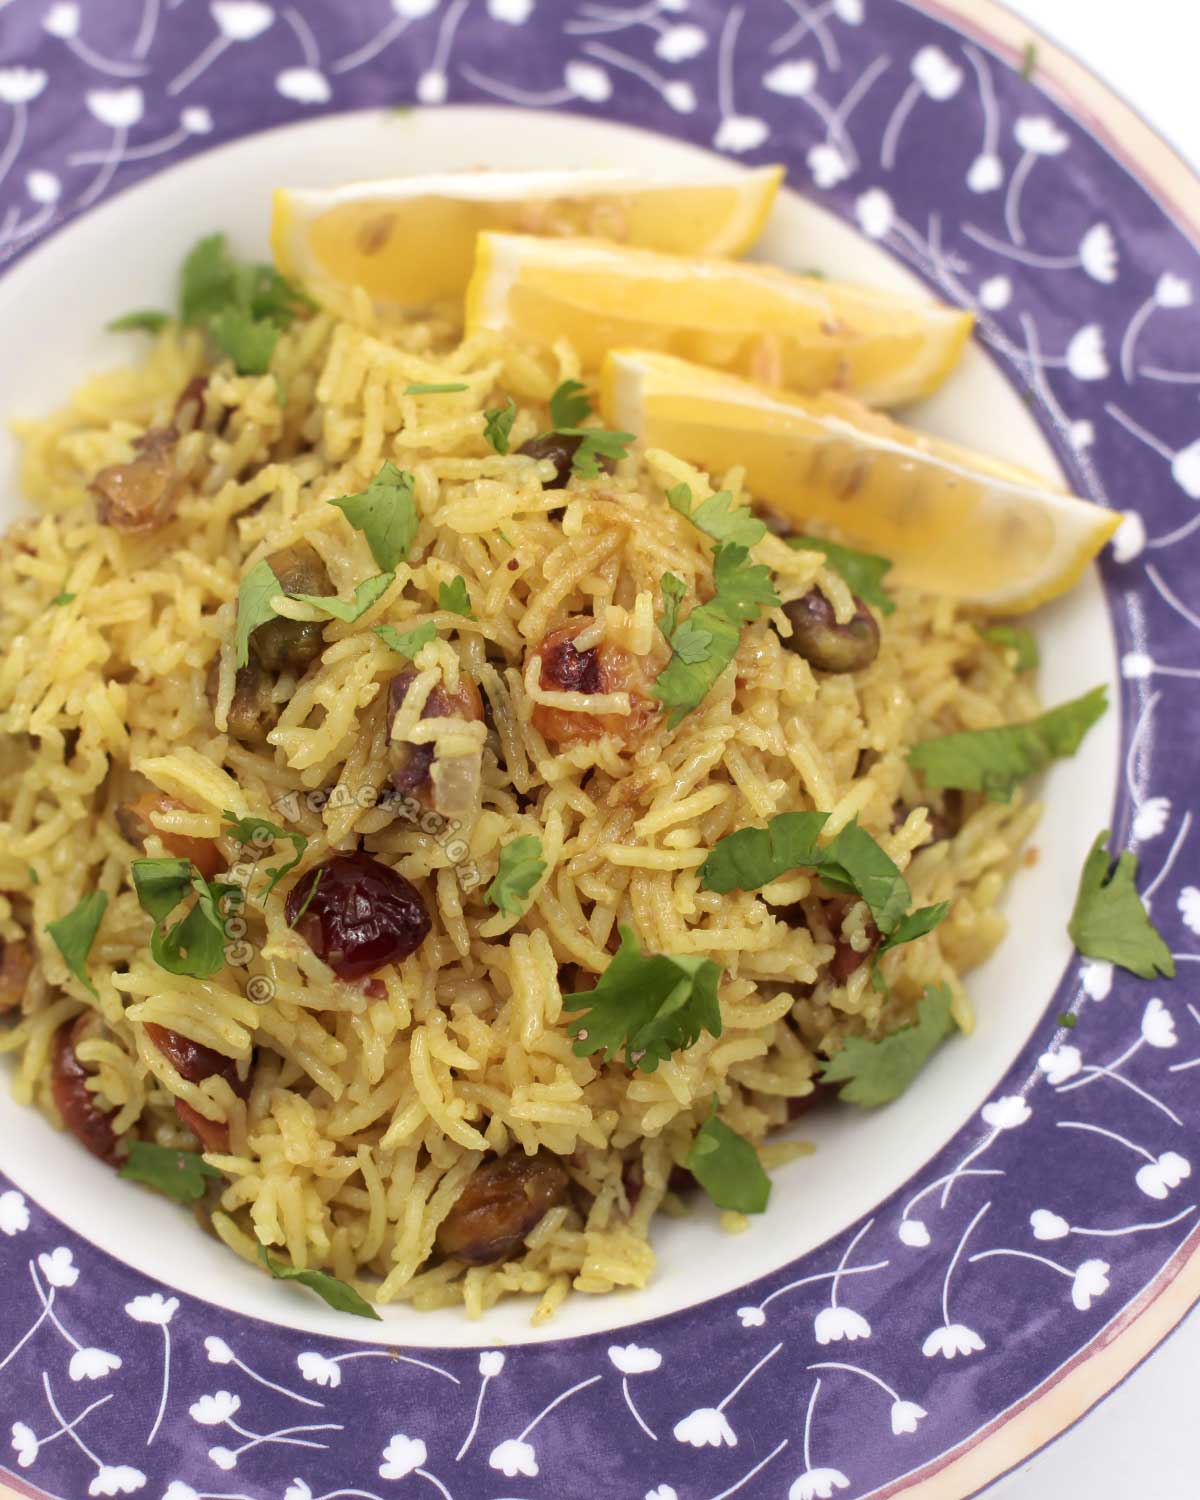 Cranberry and pistachio pilaf garnished with cilantro and served with lemon wedges on the side